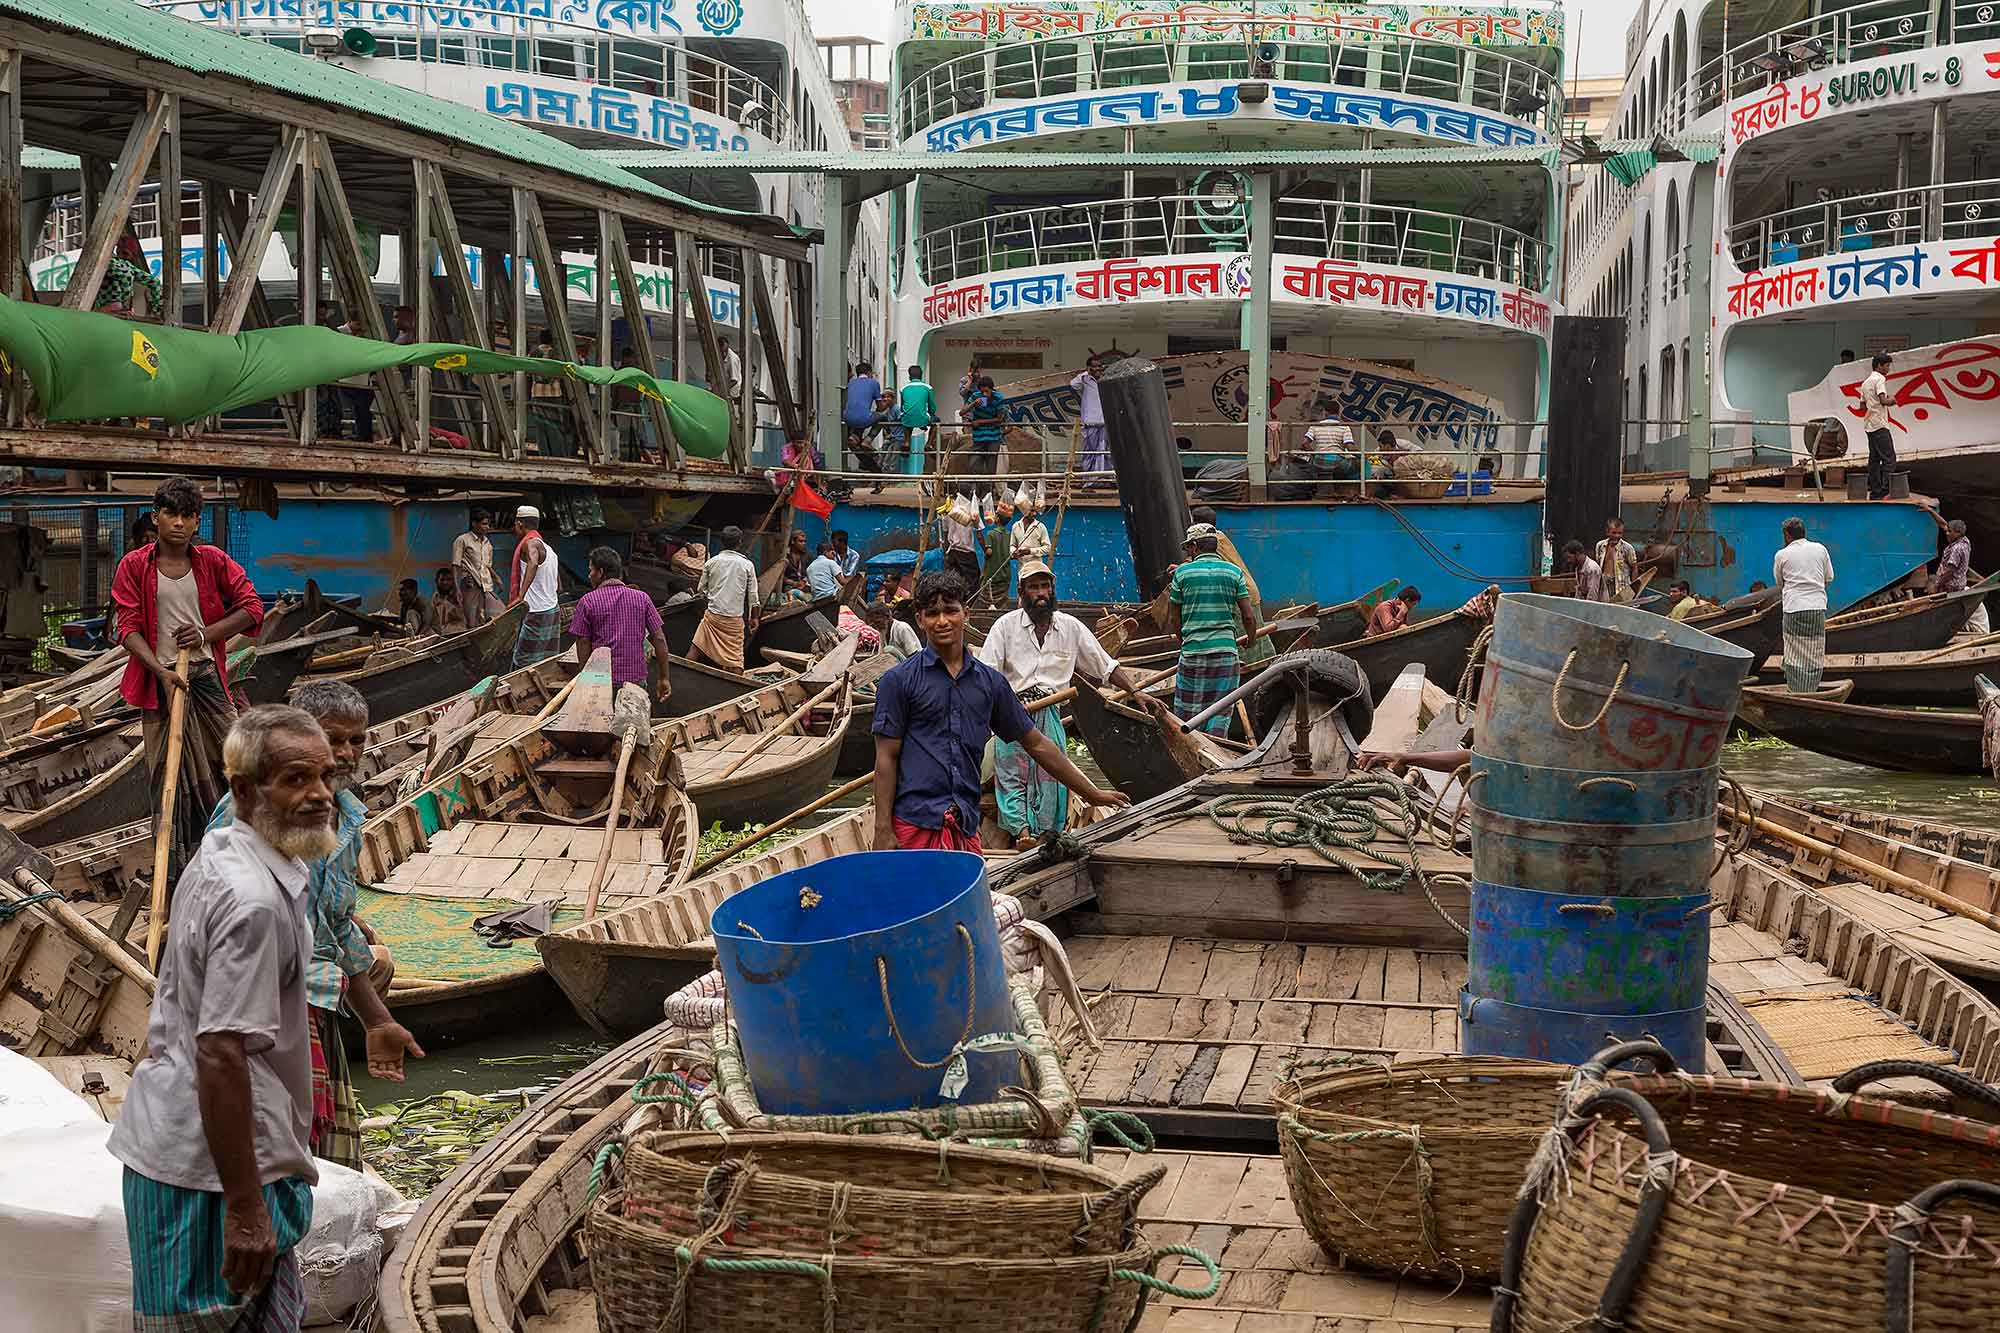 The Sampans – the small wooden boats, powered and steered by one oar – are a lifeline in Dhaka, Bangladesh. © Ulli Maier & Nisa Maier